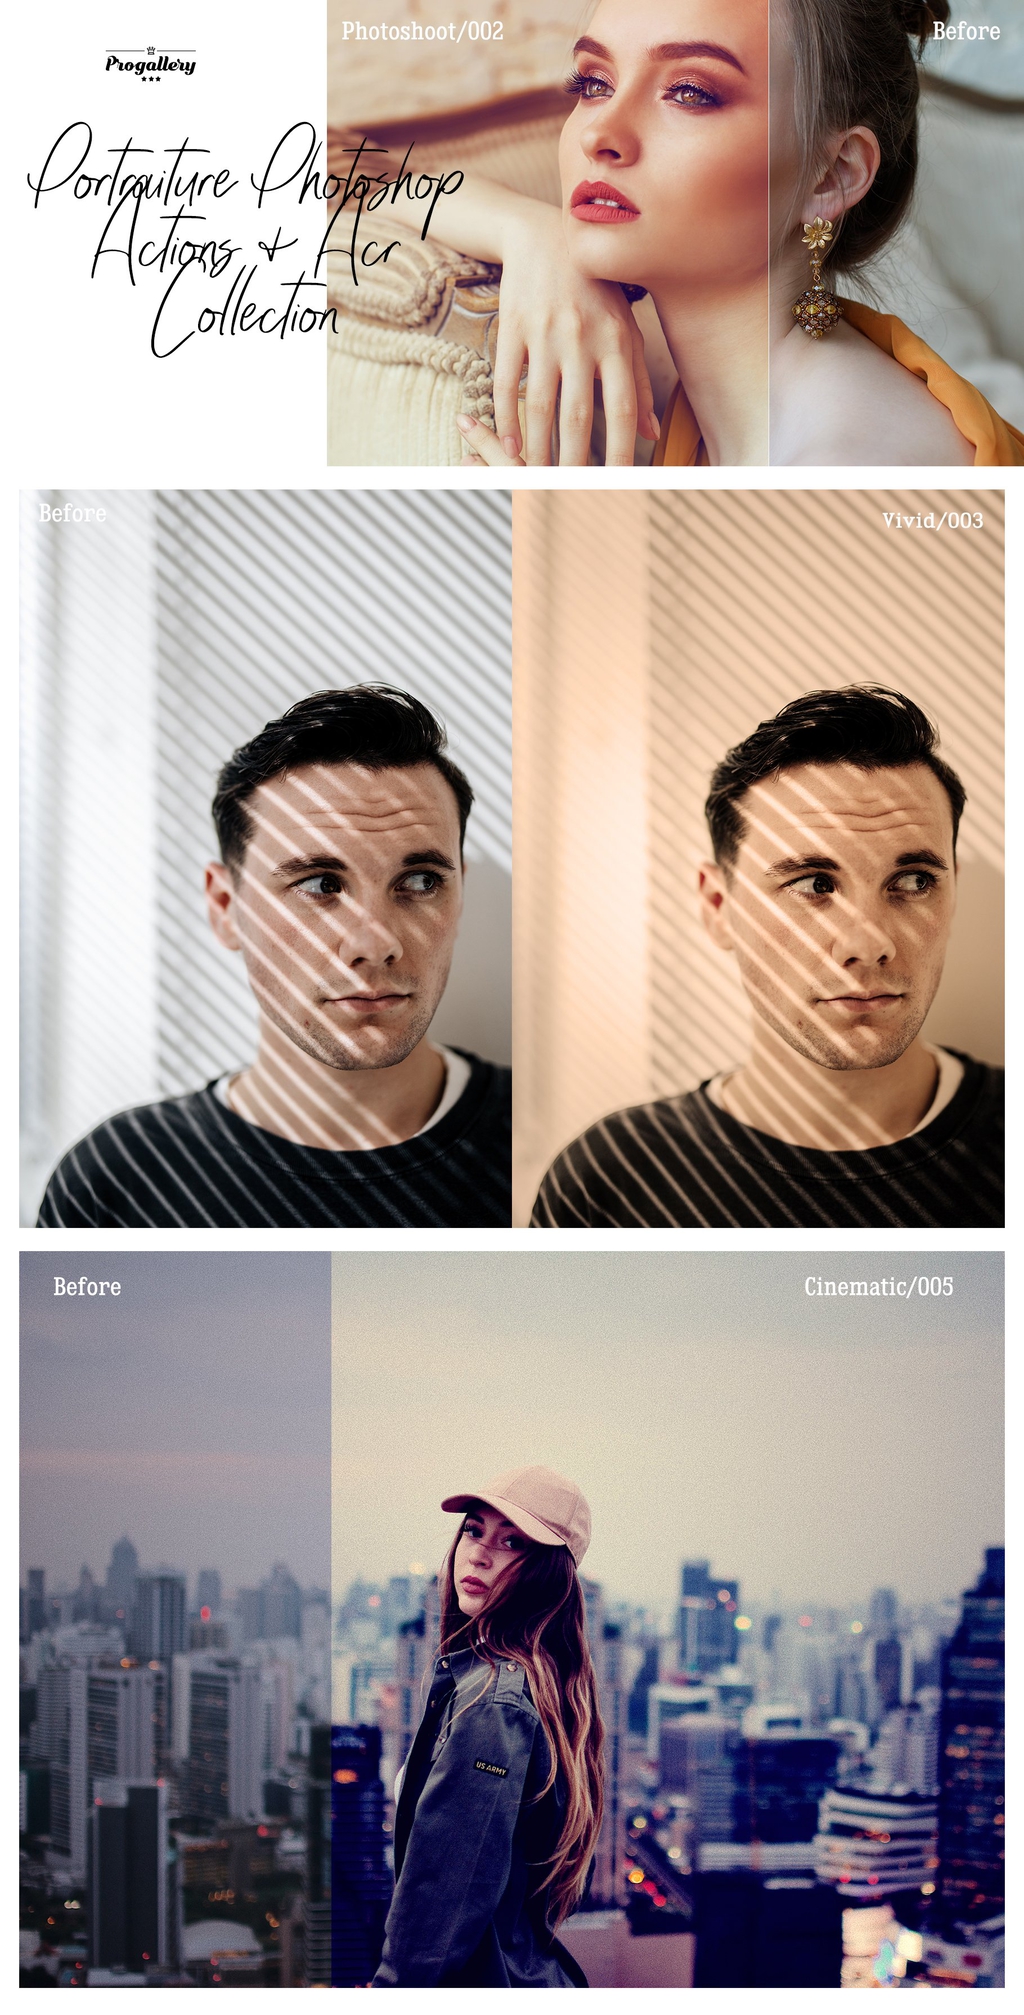 300plus Portraiture Photoshop Actions and ACR Screenshot 02